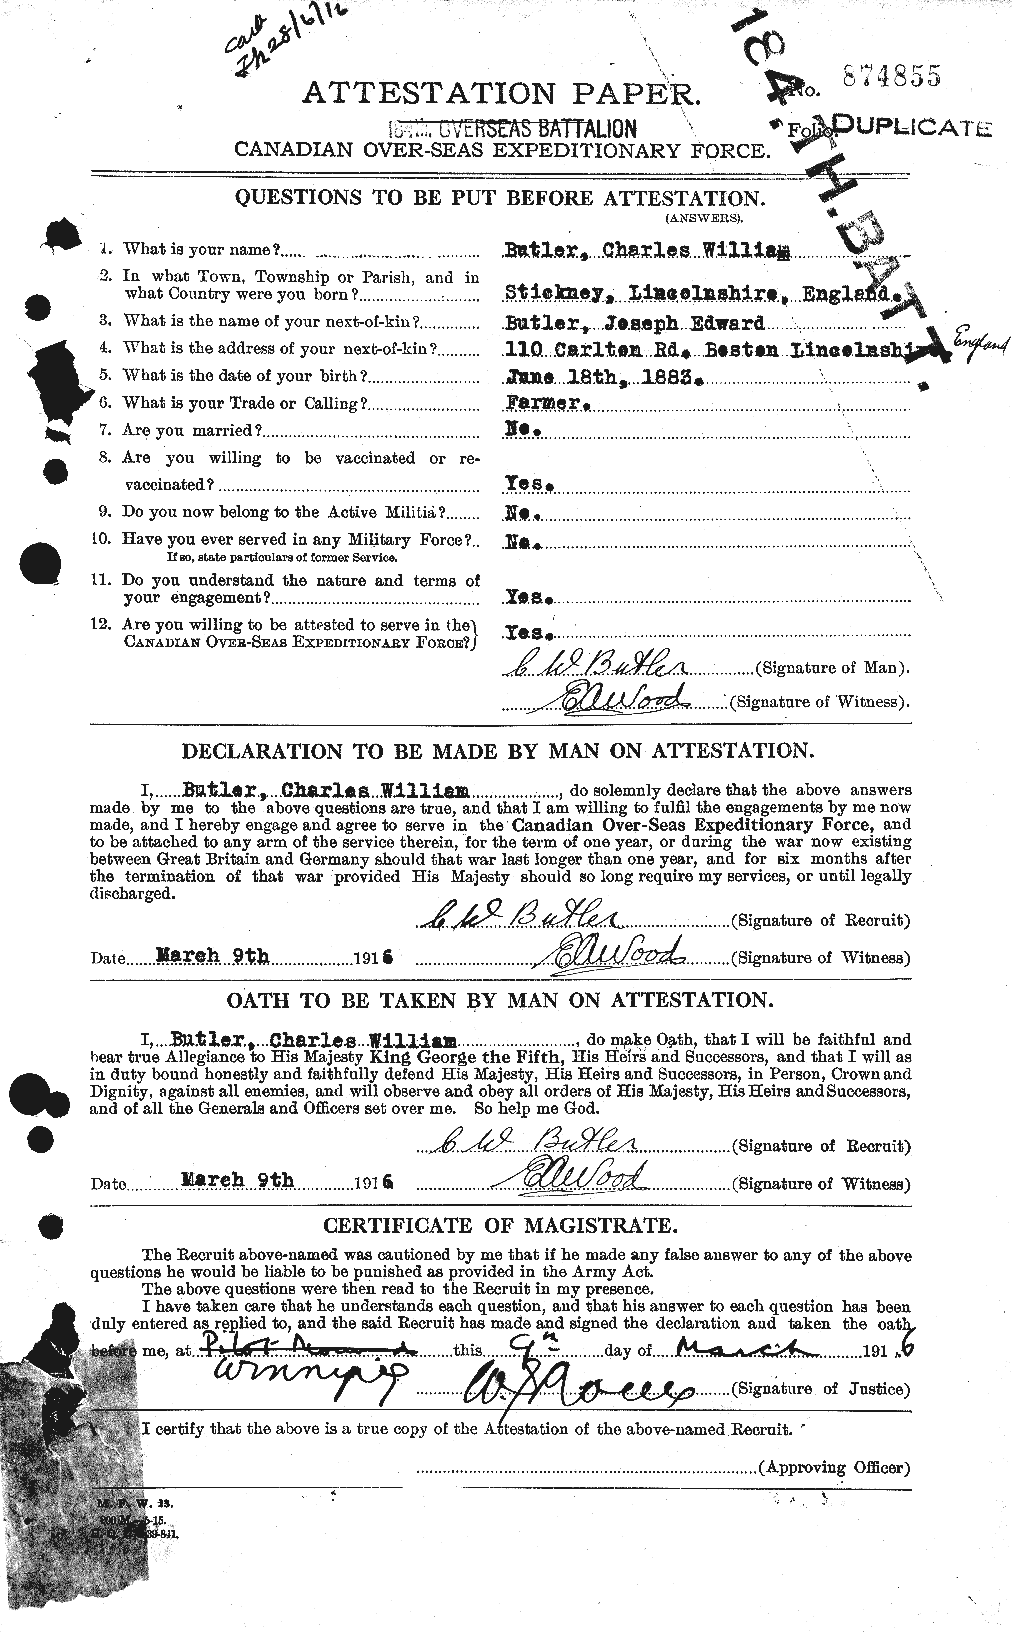 Personnel Records of the First World War - CEF 275833a